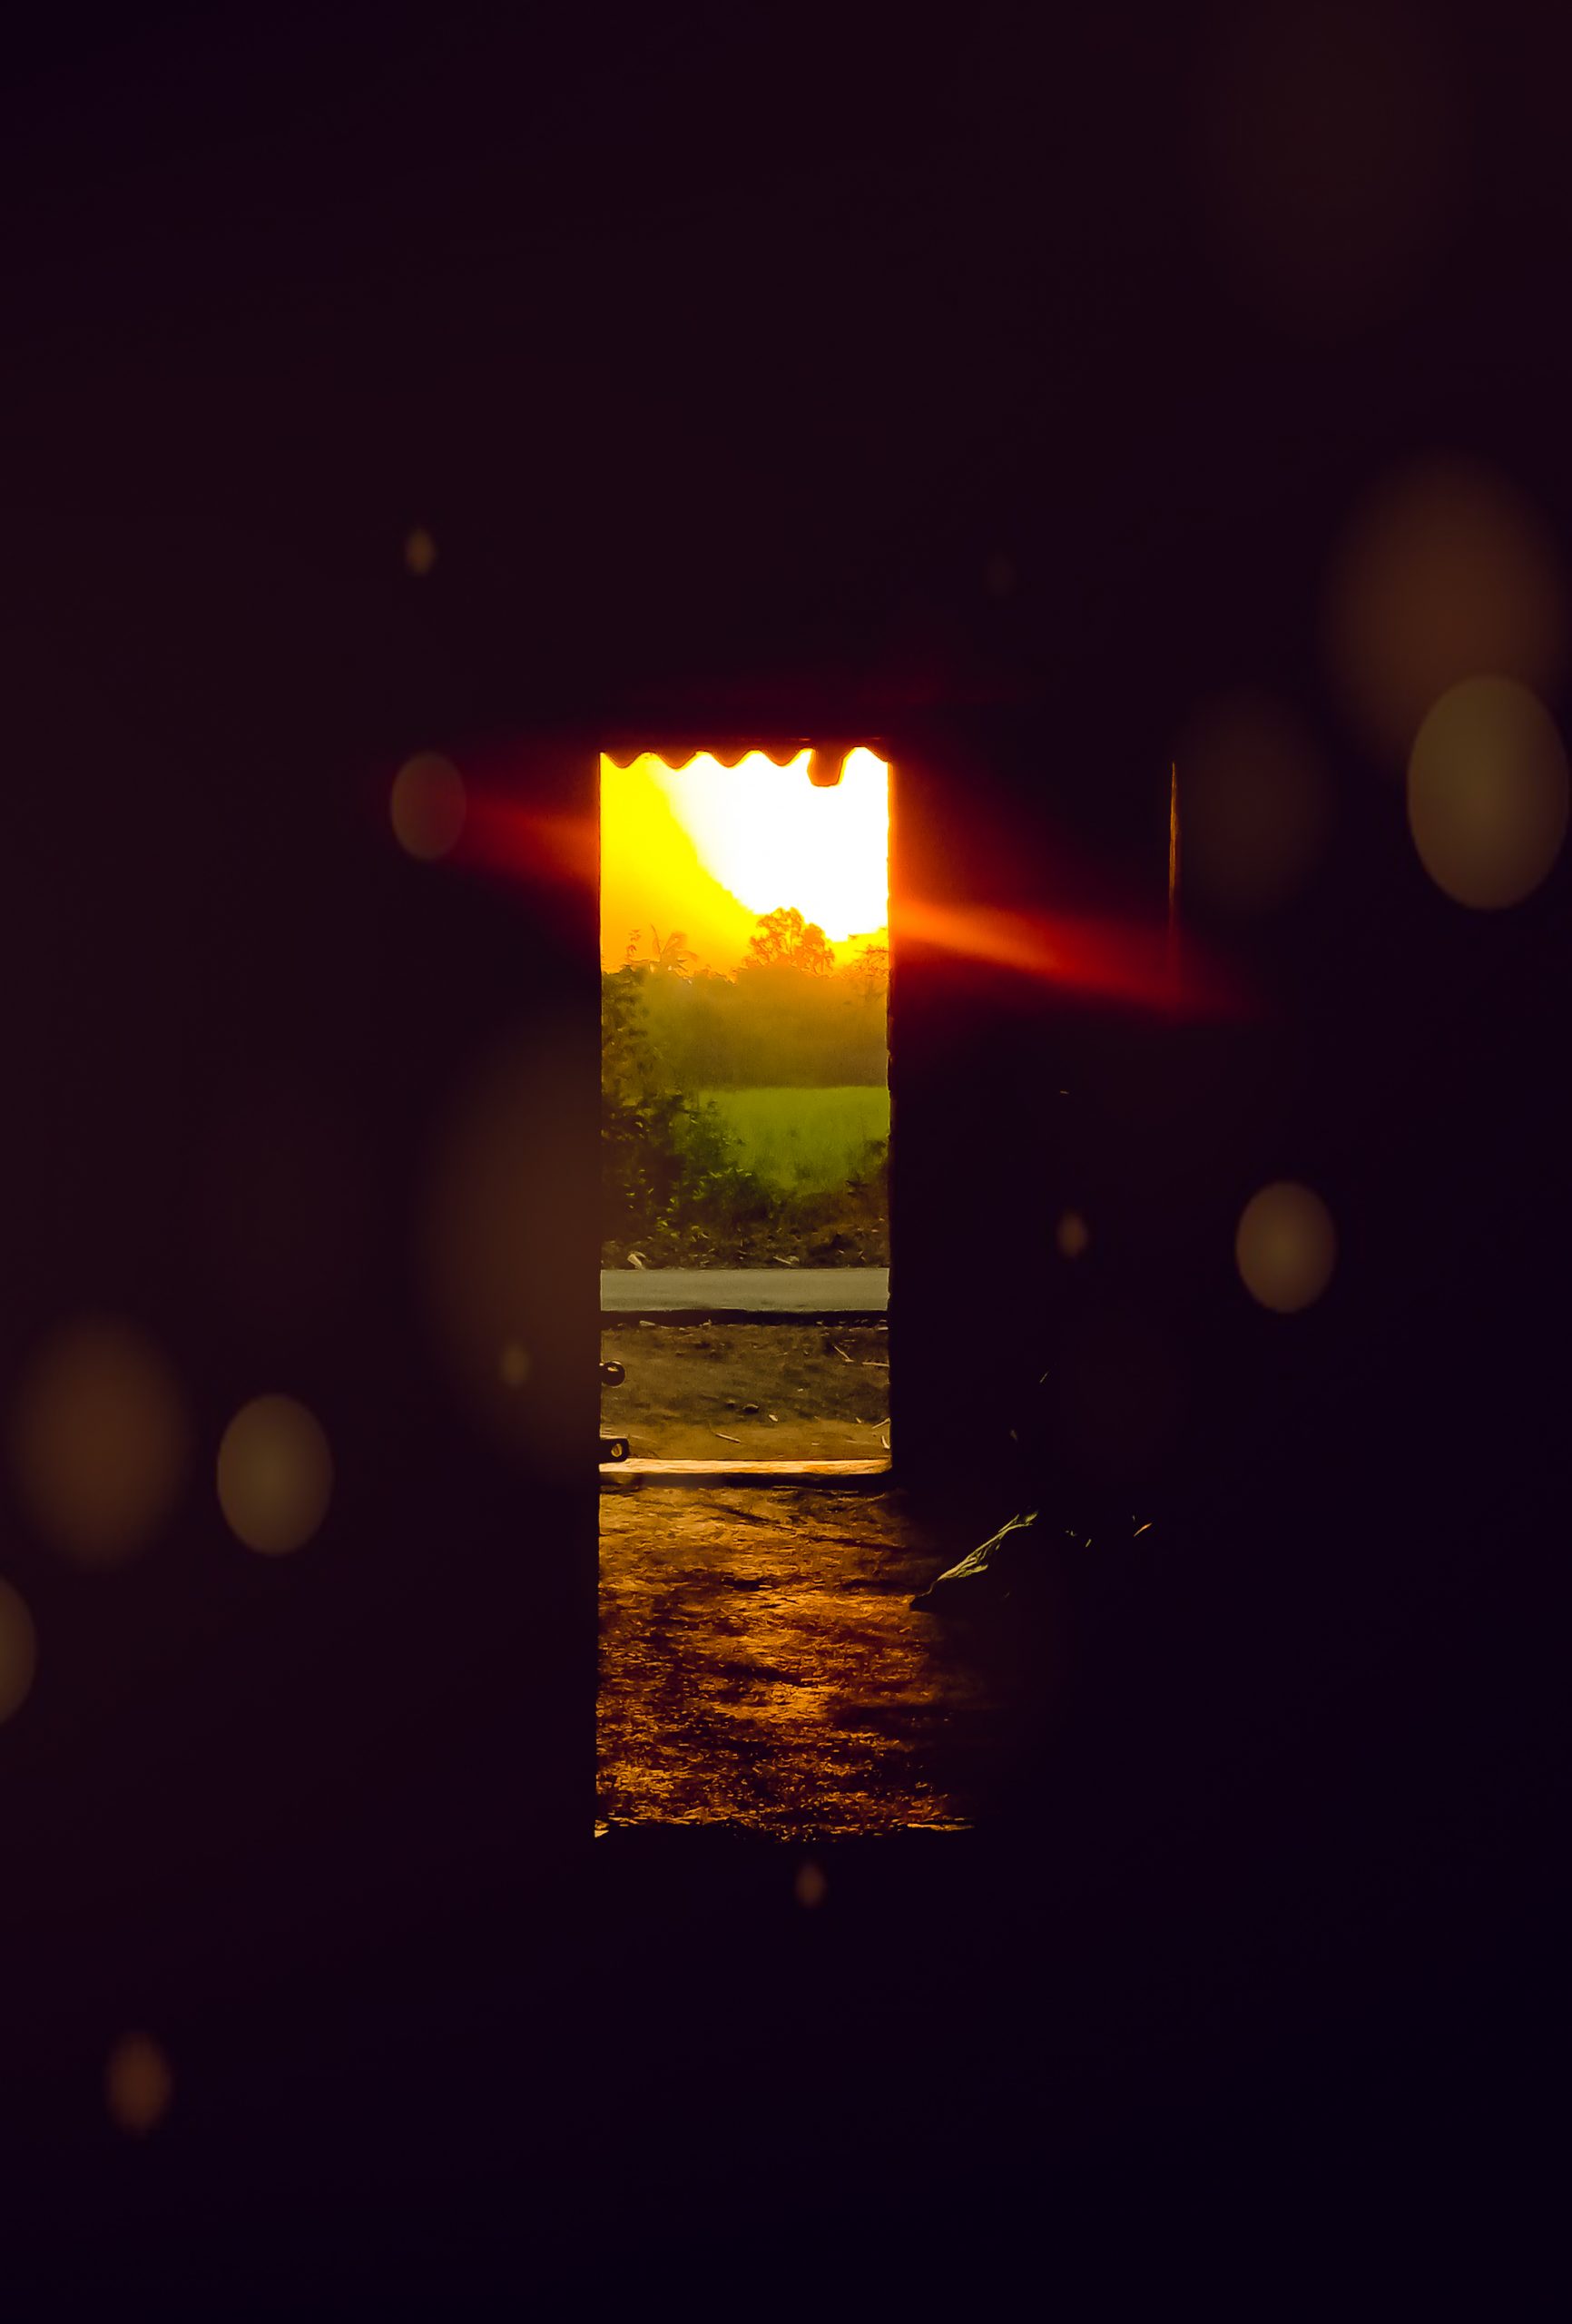 Sunrays falling in a room through a door